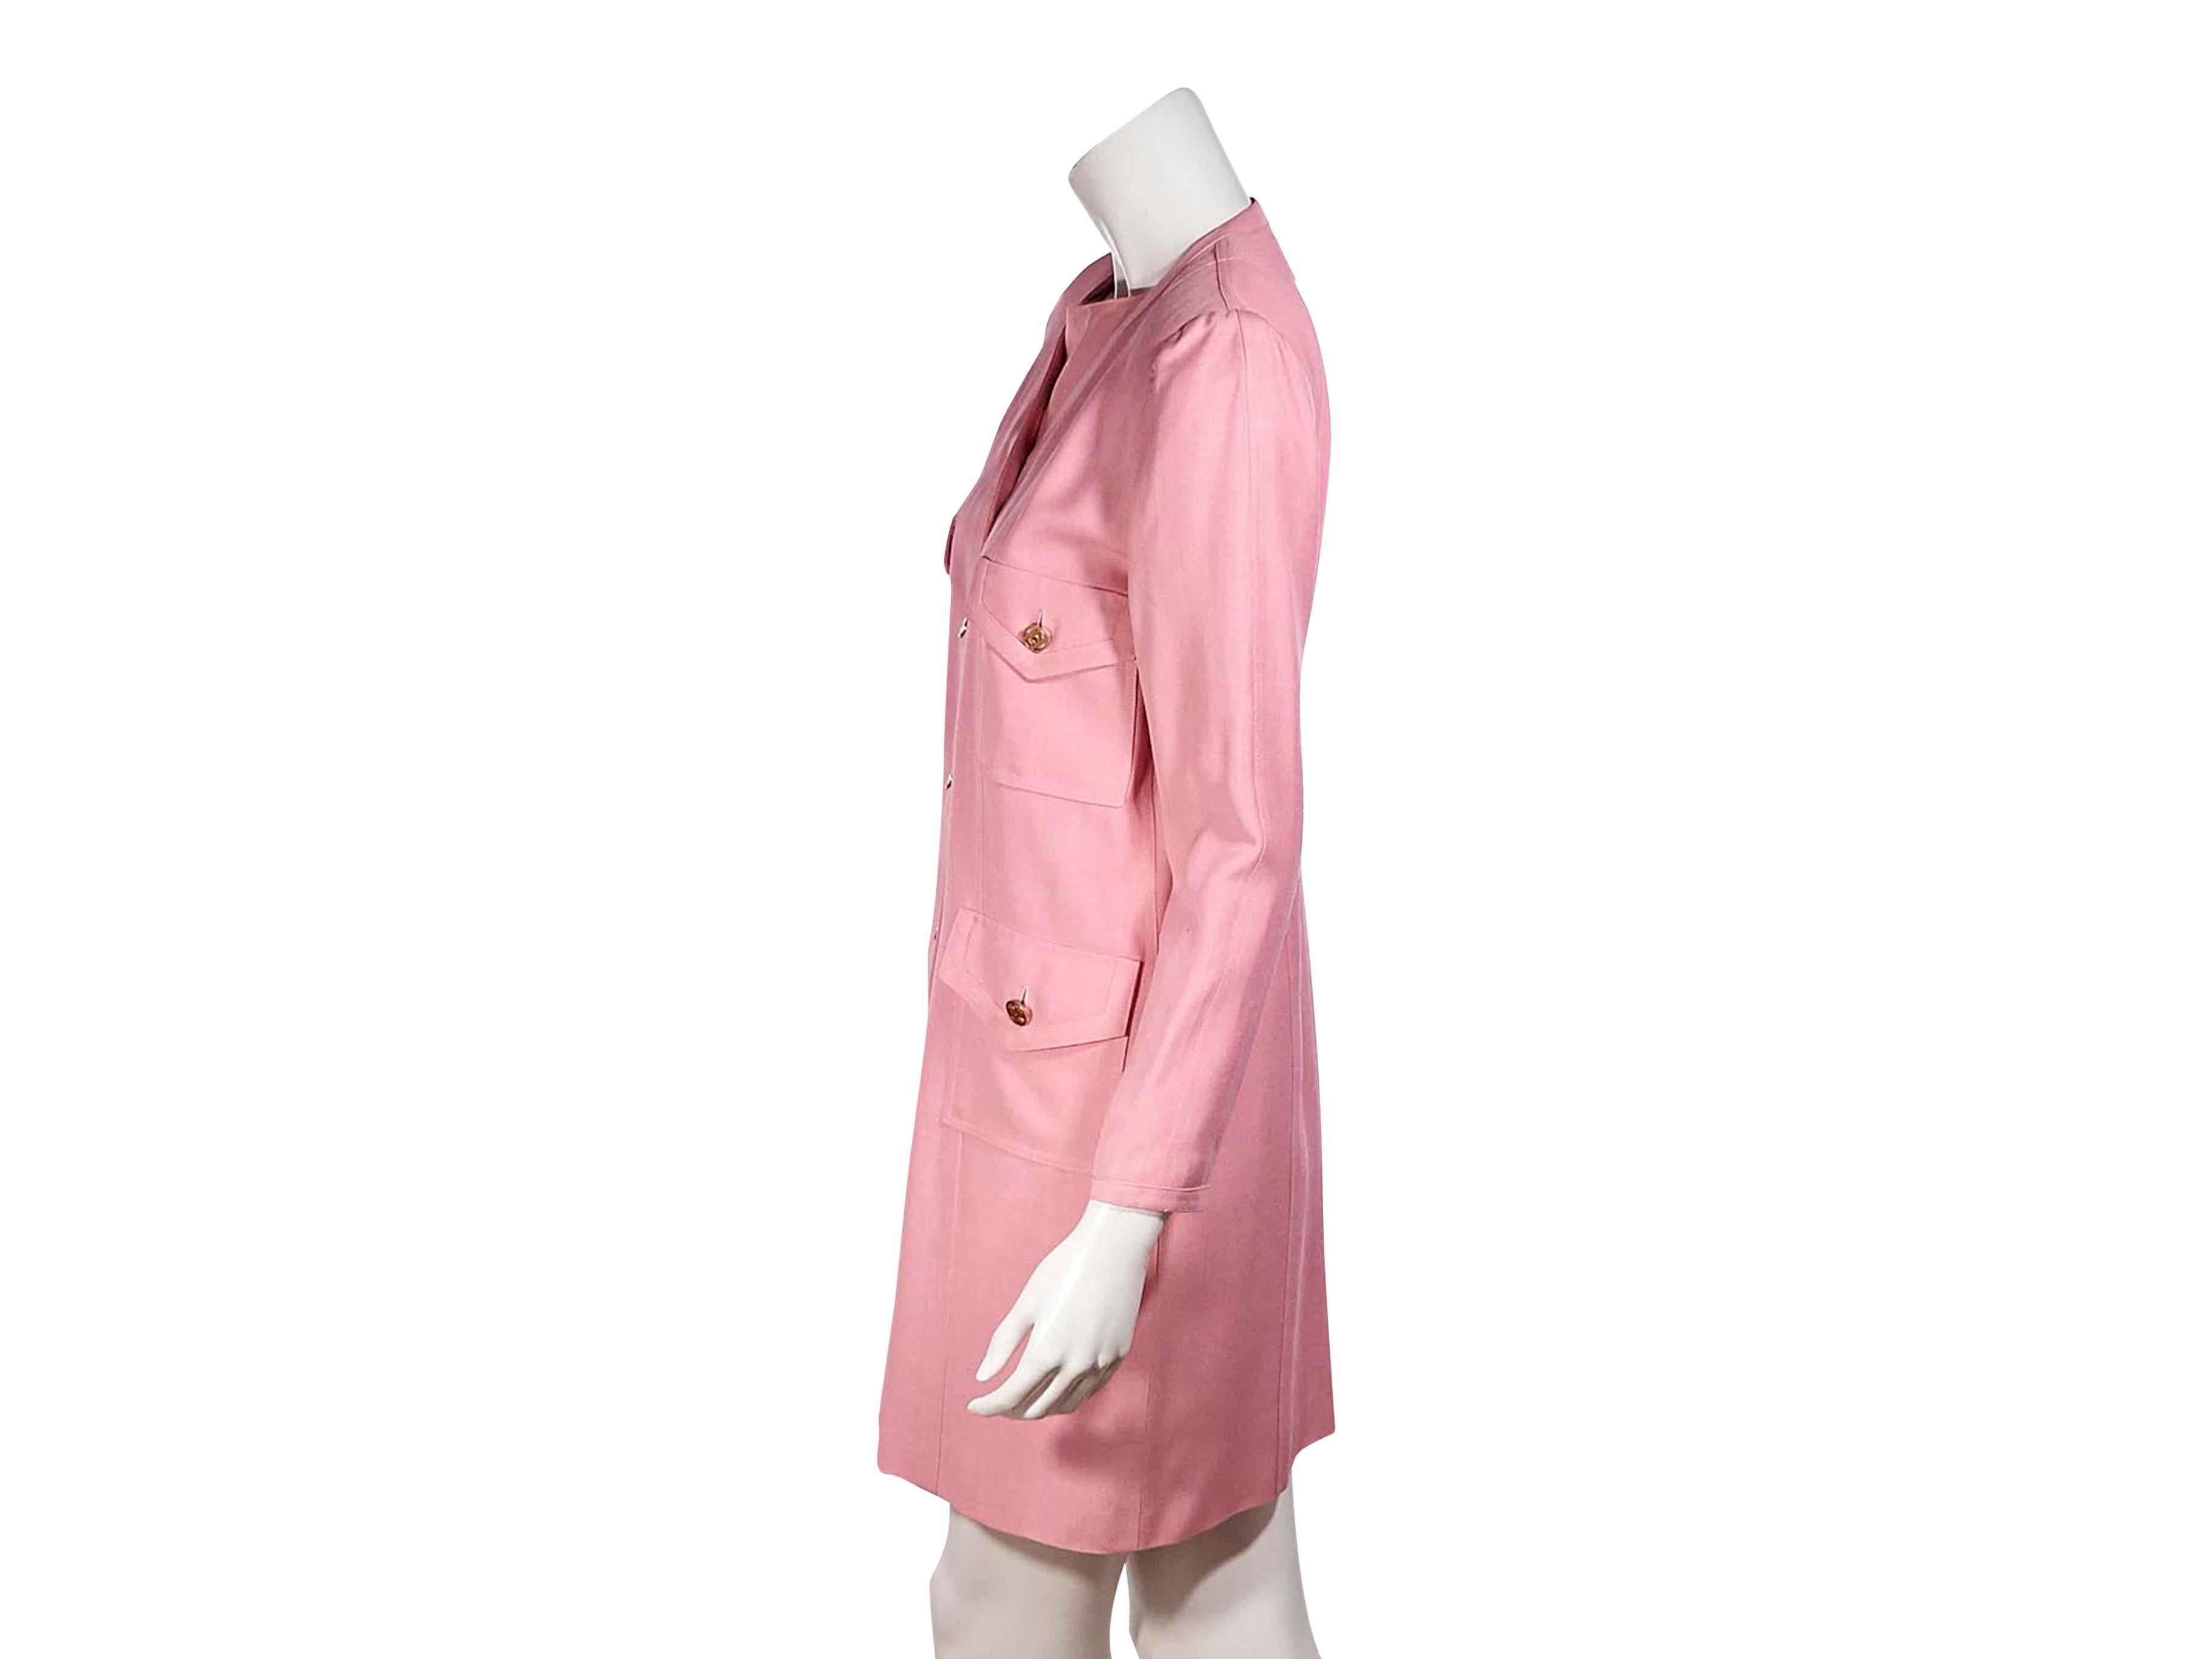 Product details: Vintage pink silk jacket and dress set by Chanel Boutique.  V-neck. Cropped long sleeves. Four pockets at front. Embossed logo gold-tone buttons. Button front closures. Matching sheath dress. Scoop-neck.  Sleeveless. Contrast detail